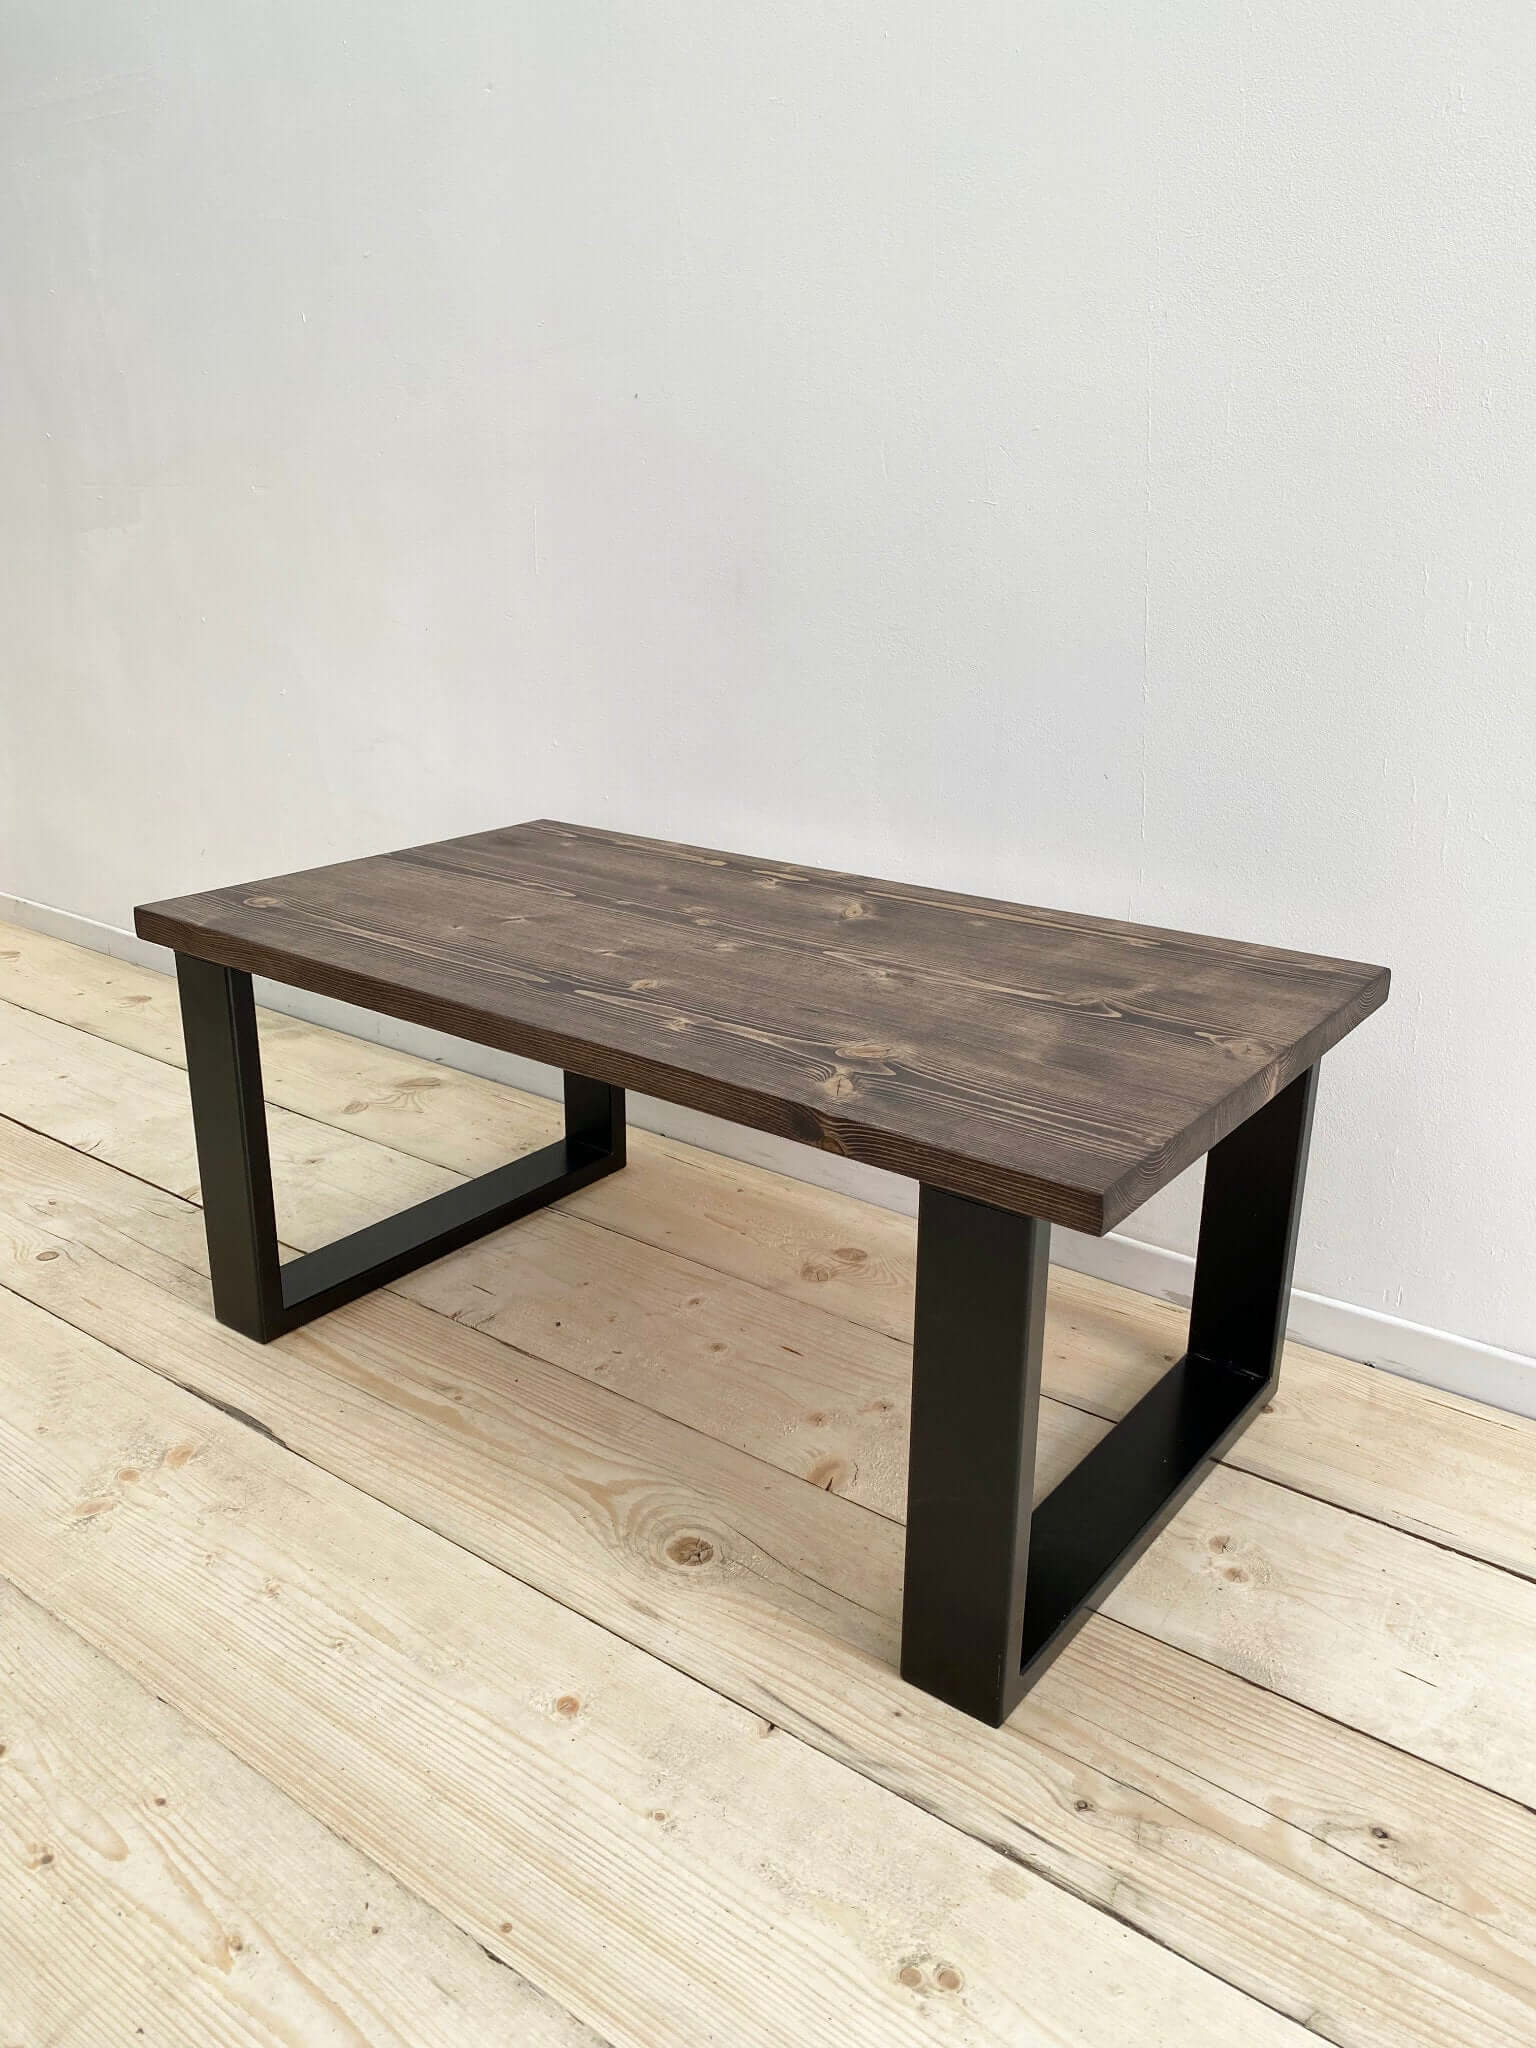 Reclaimed wood coffee table with industrial legs.